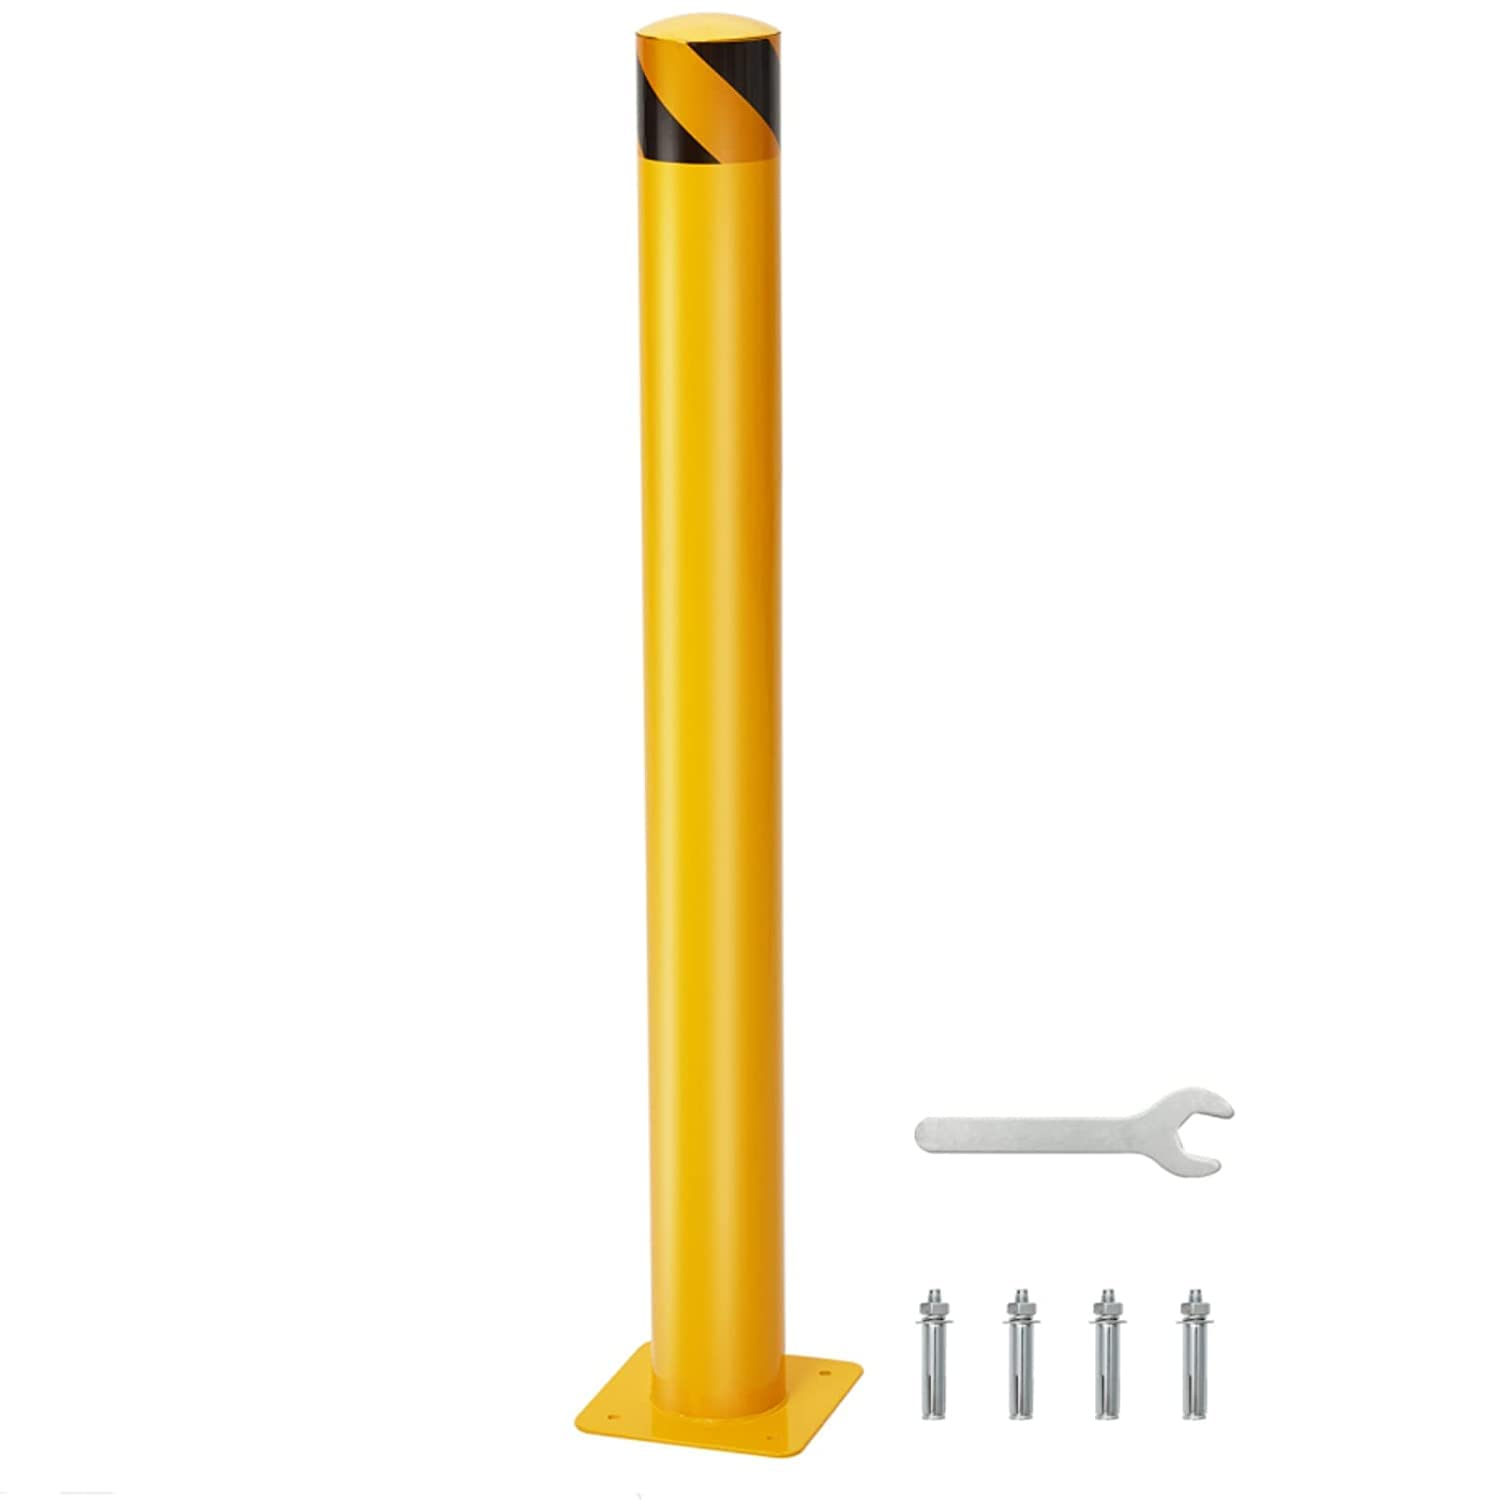 42" Safety Bollard Post 1 Pack for Driveway Barrier & Parking